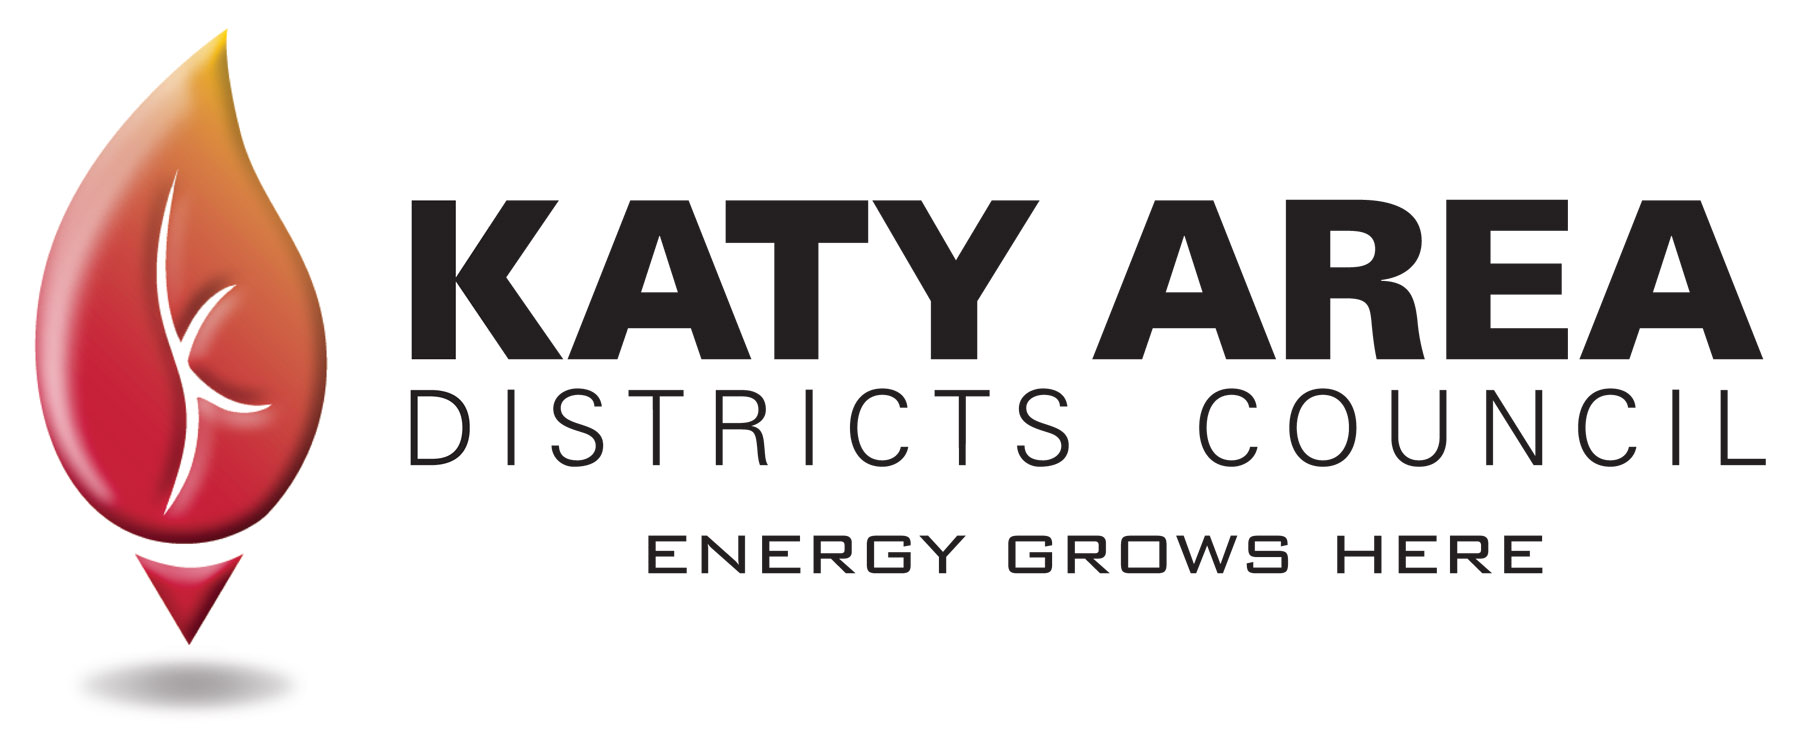 Katy Area Districts Council's Image